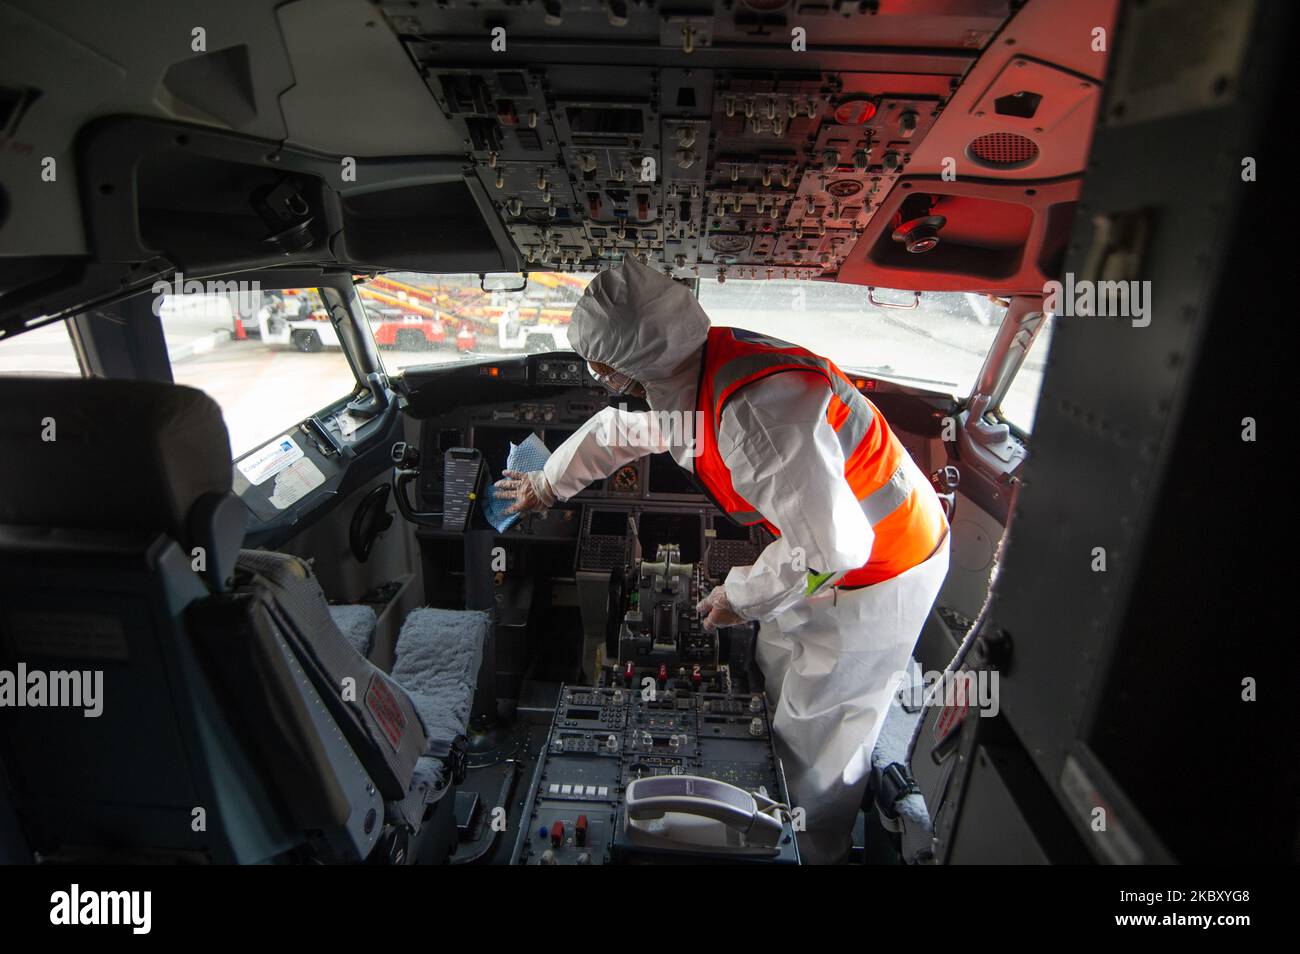 A worker with a biohazard suit disinfects and cleans the cockpit of the planes before boarding to prevent the spread of Novel Coronavirus at el Dorado Airport after five months of inactivity El Dorado International Airport prepares with biosecurity measures to prevent the spread of the Novel Coronavirus to resume activities on september first with 14 diferent domesitc routes in Bogota, Colombia on August 31, 2020. (Photo by Sebastian Barros/NurPhoto) Stock Photo